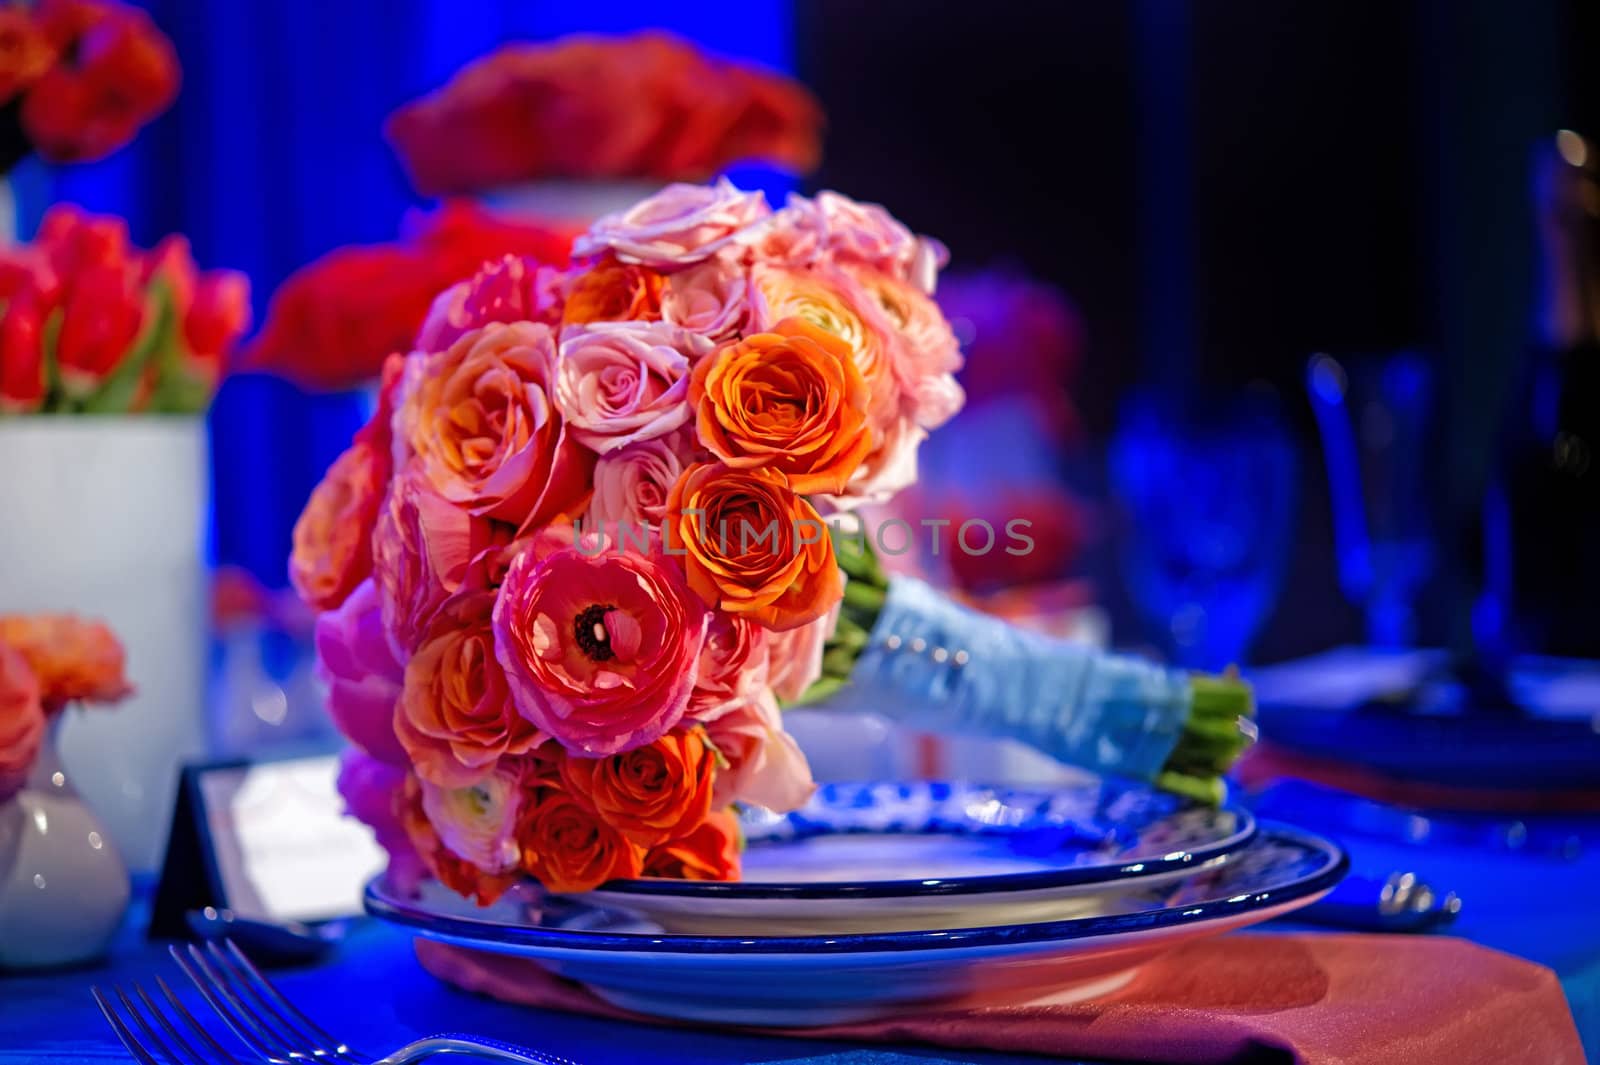 Colorful wedding bouquet by gregory21